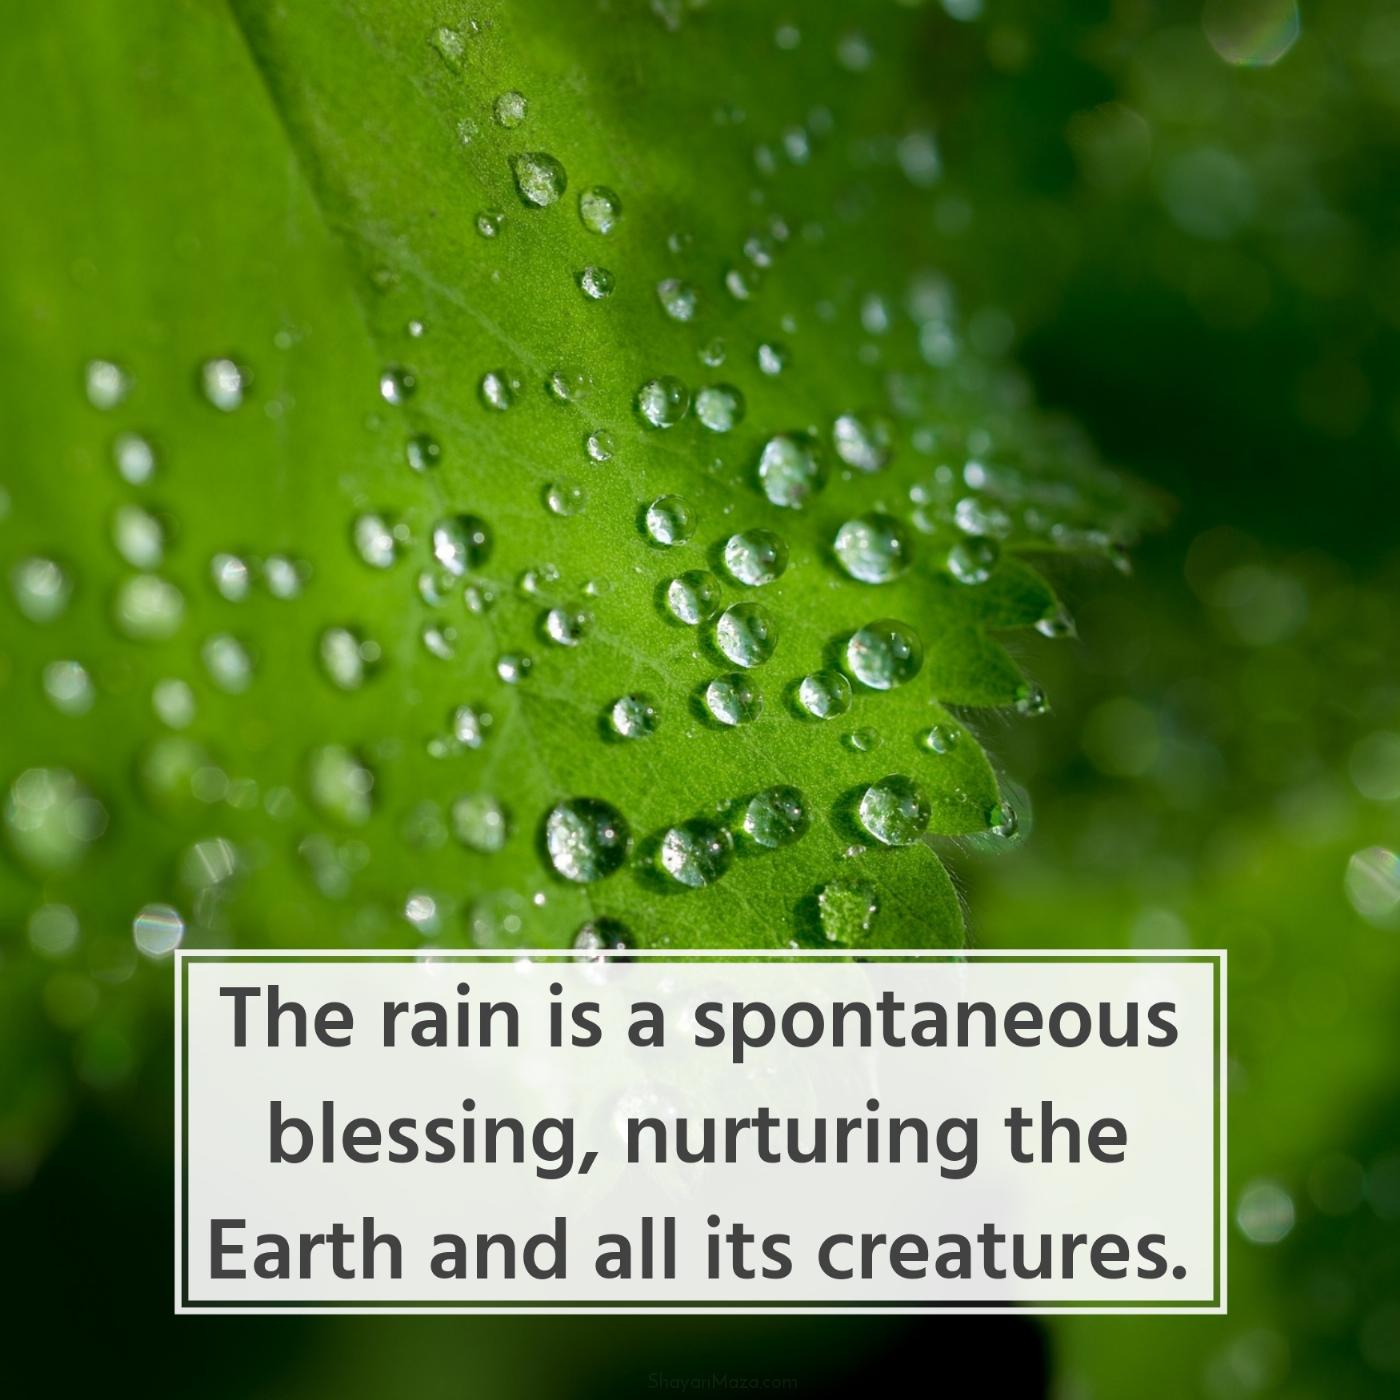 The rain is a spontaneous blessing nurturing the Earth and all its creatures